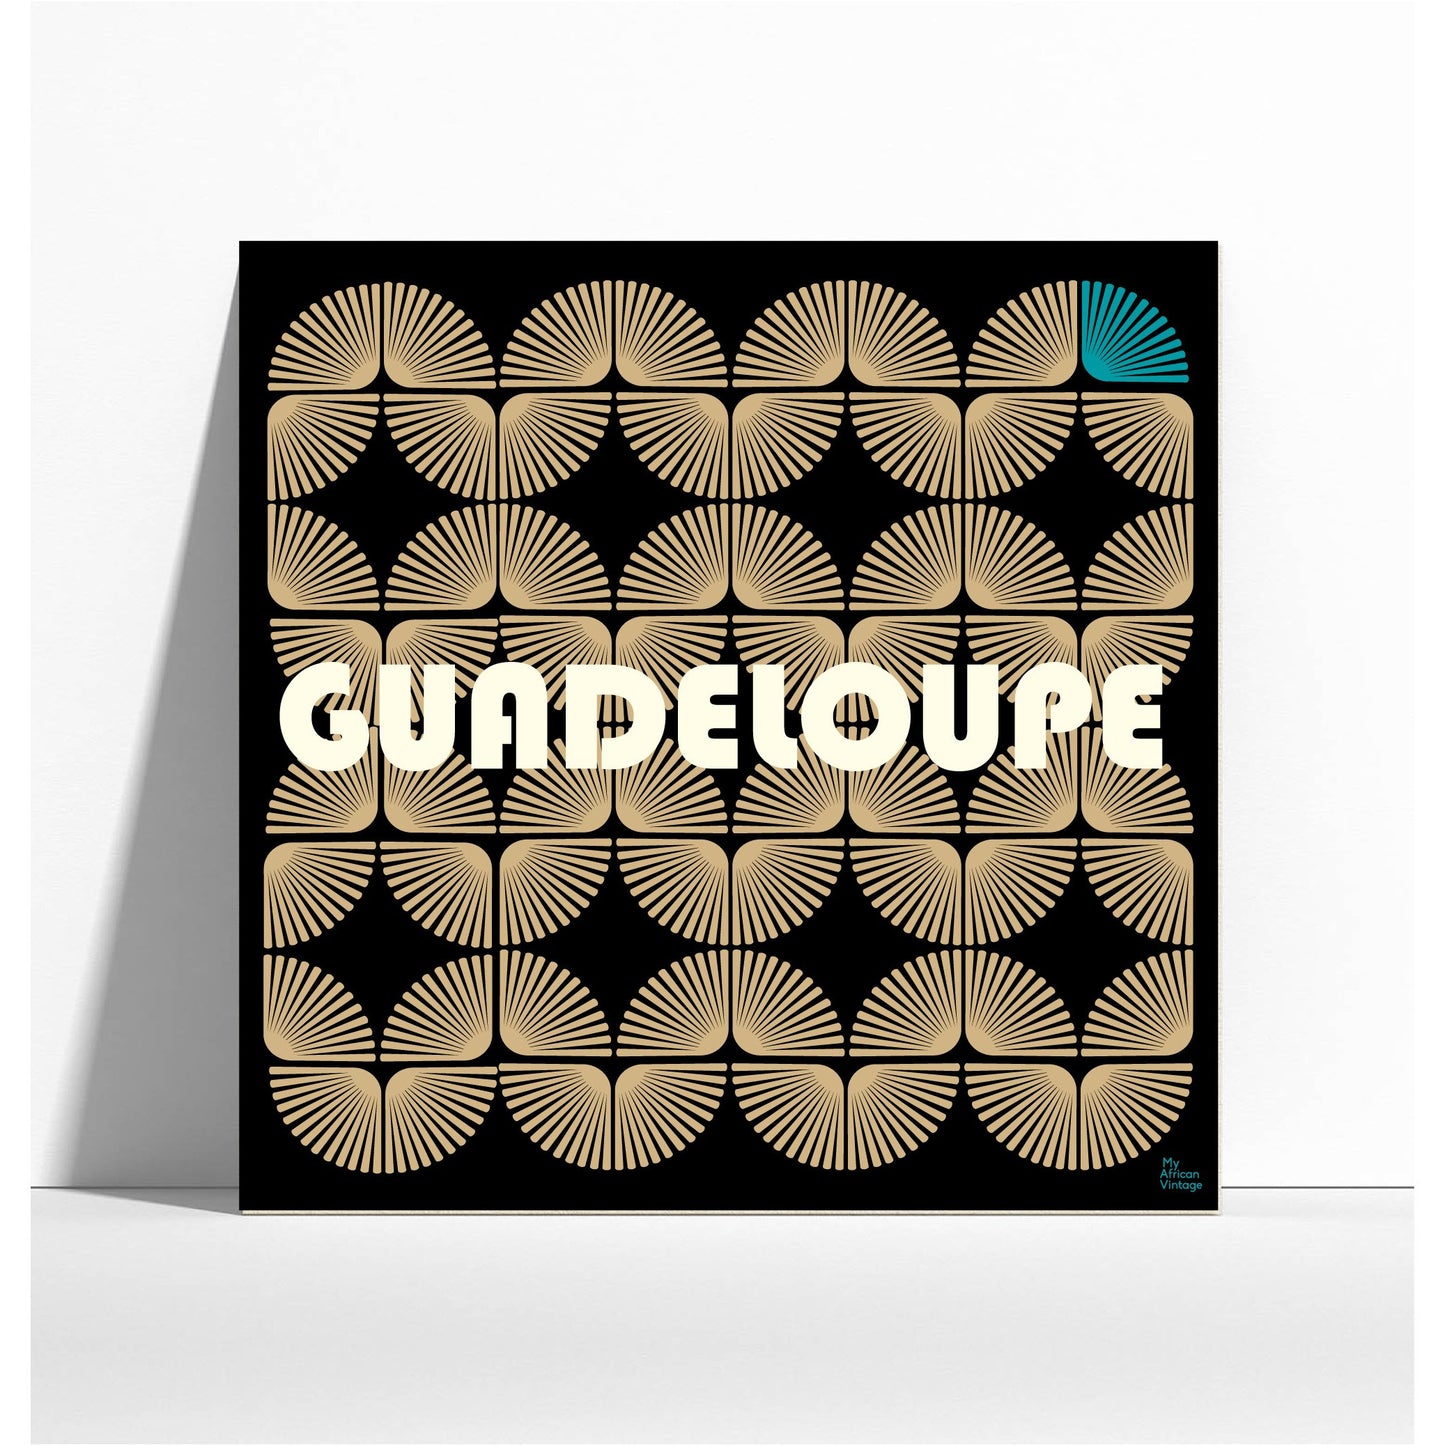 "Guadeloupe" retro style poster  - "My African Vintage" collection